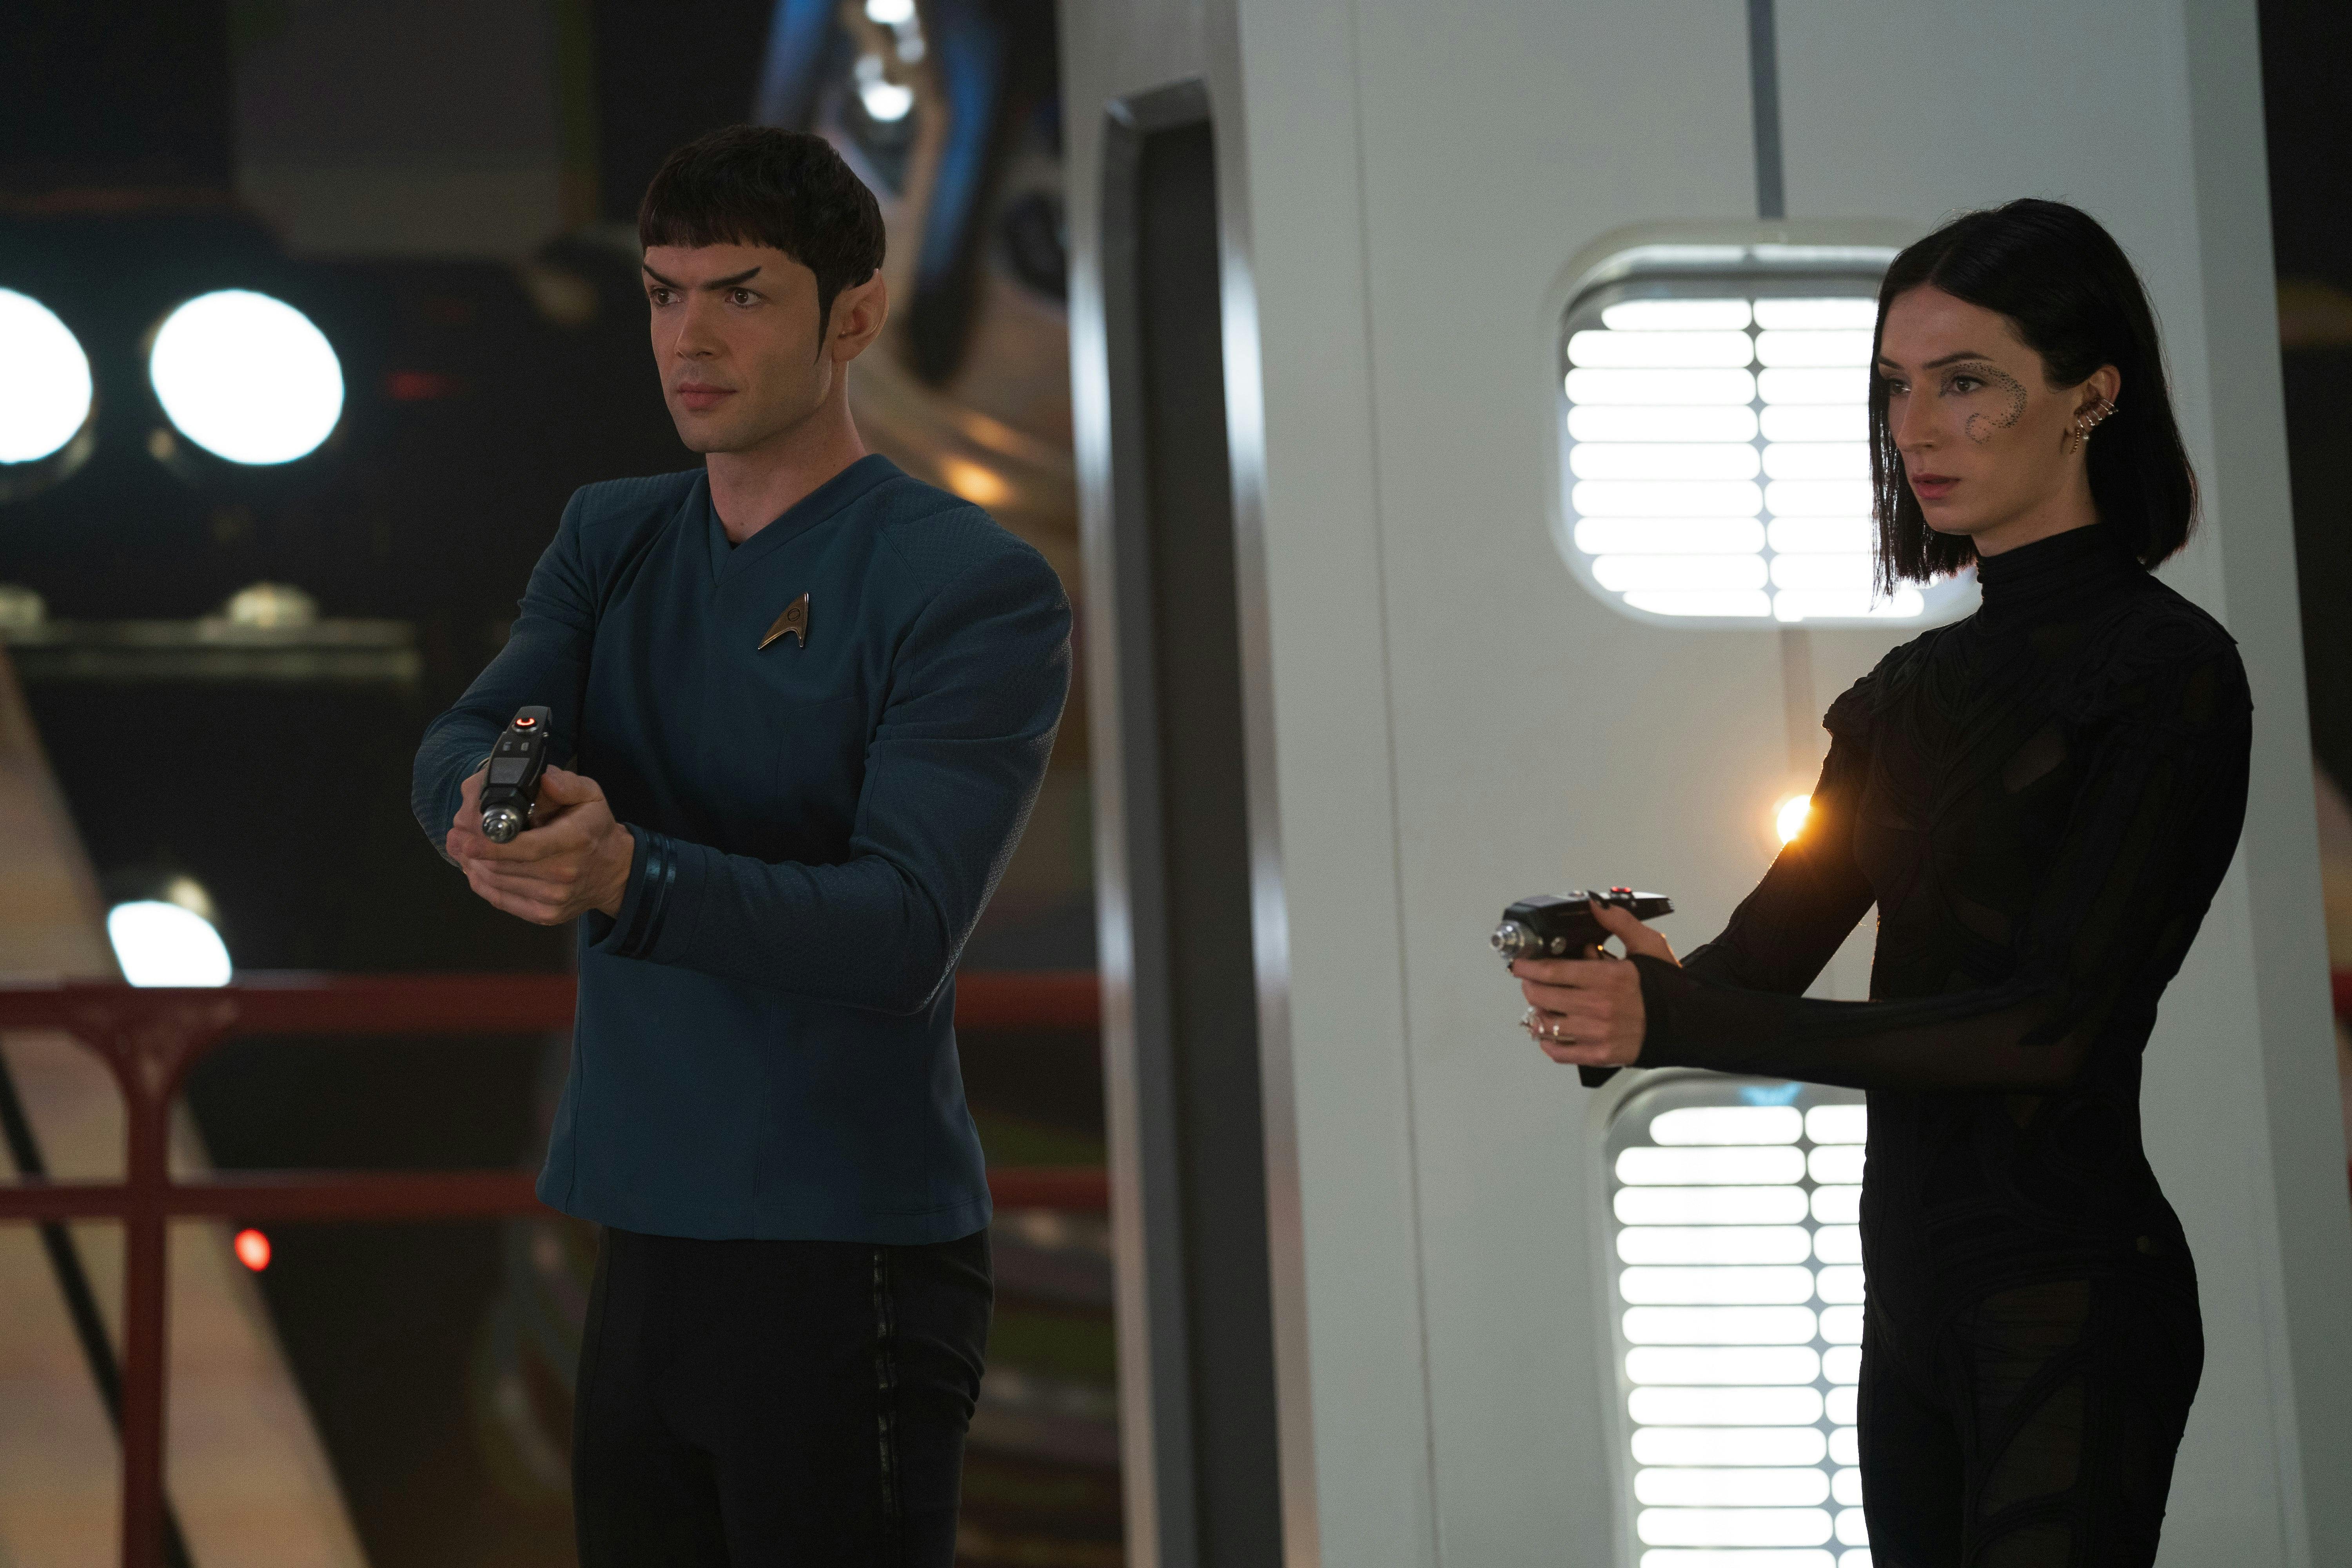 Spock (Ethan Peck) stands next to Dr. Aspen (Jesse Jame Keitel). Both characters are holding phasers.